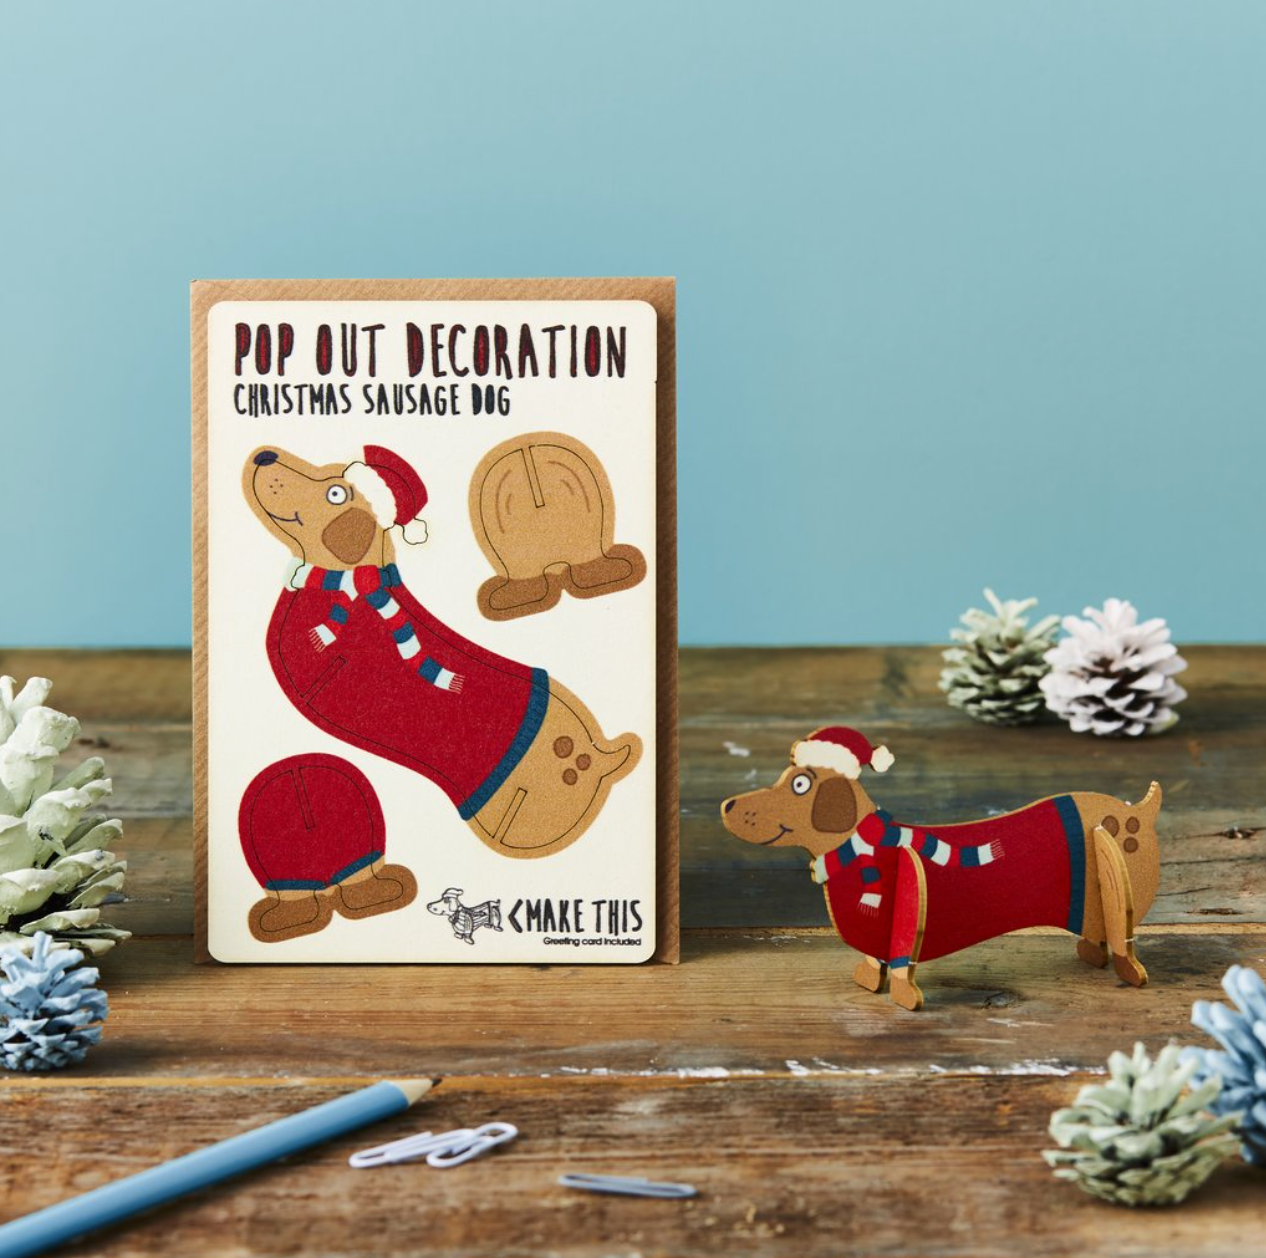 Christmas Sausage Dog Pop Out Decoration and Card